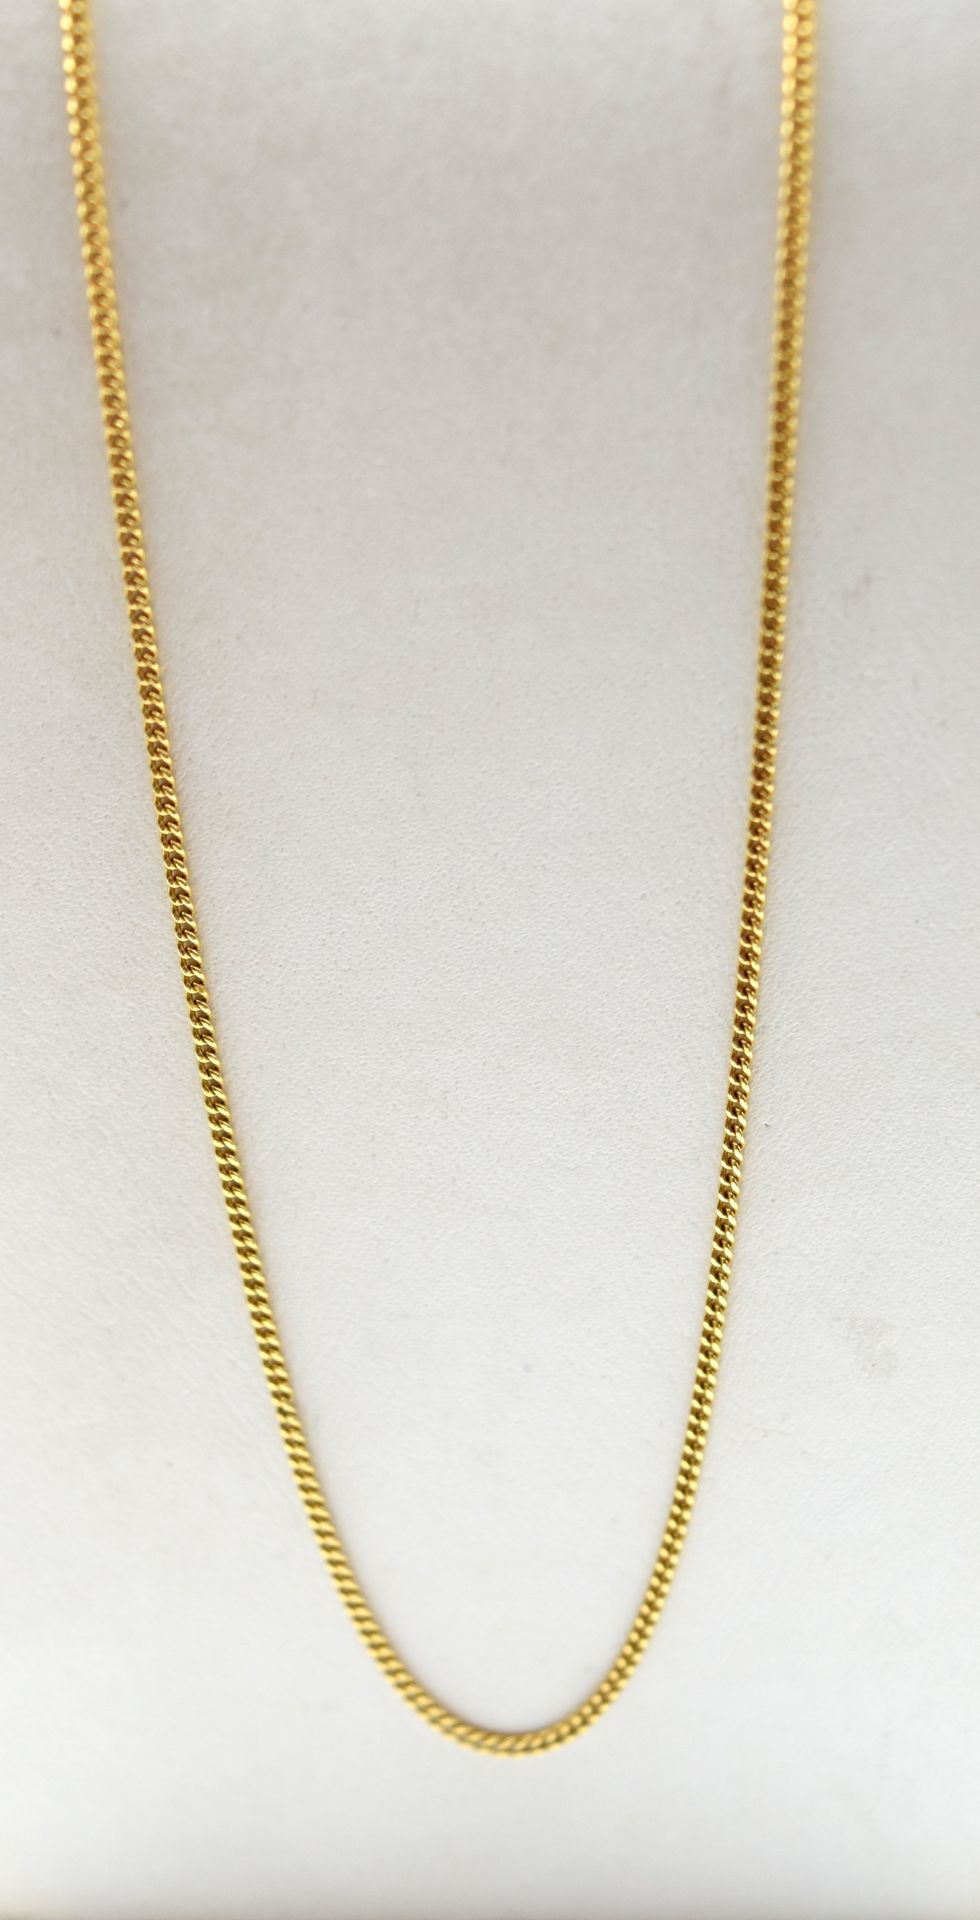 Null Necklace in 18 ct yellow gold - 3.1 g (51 cm) （18K黄金项链）Beschrijving in het &hellip;